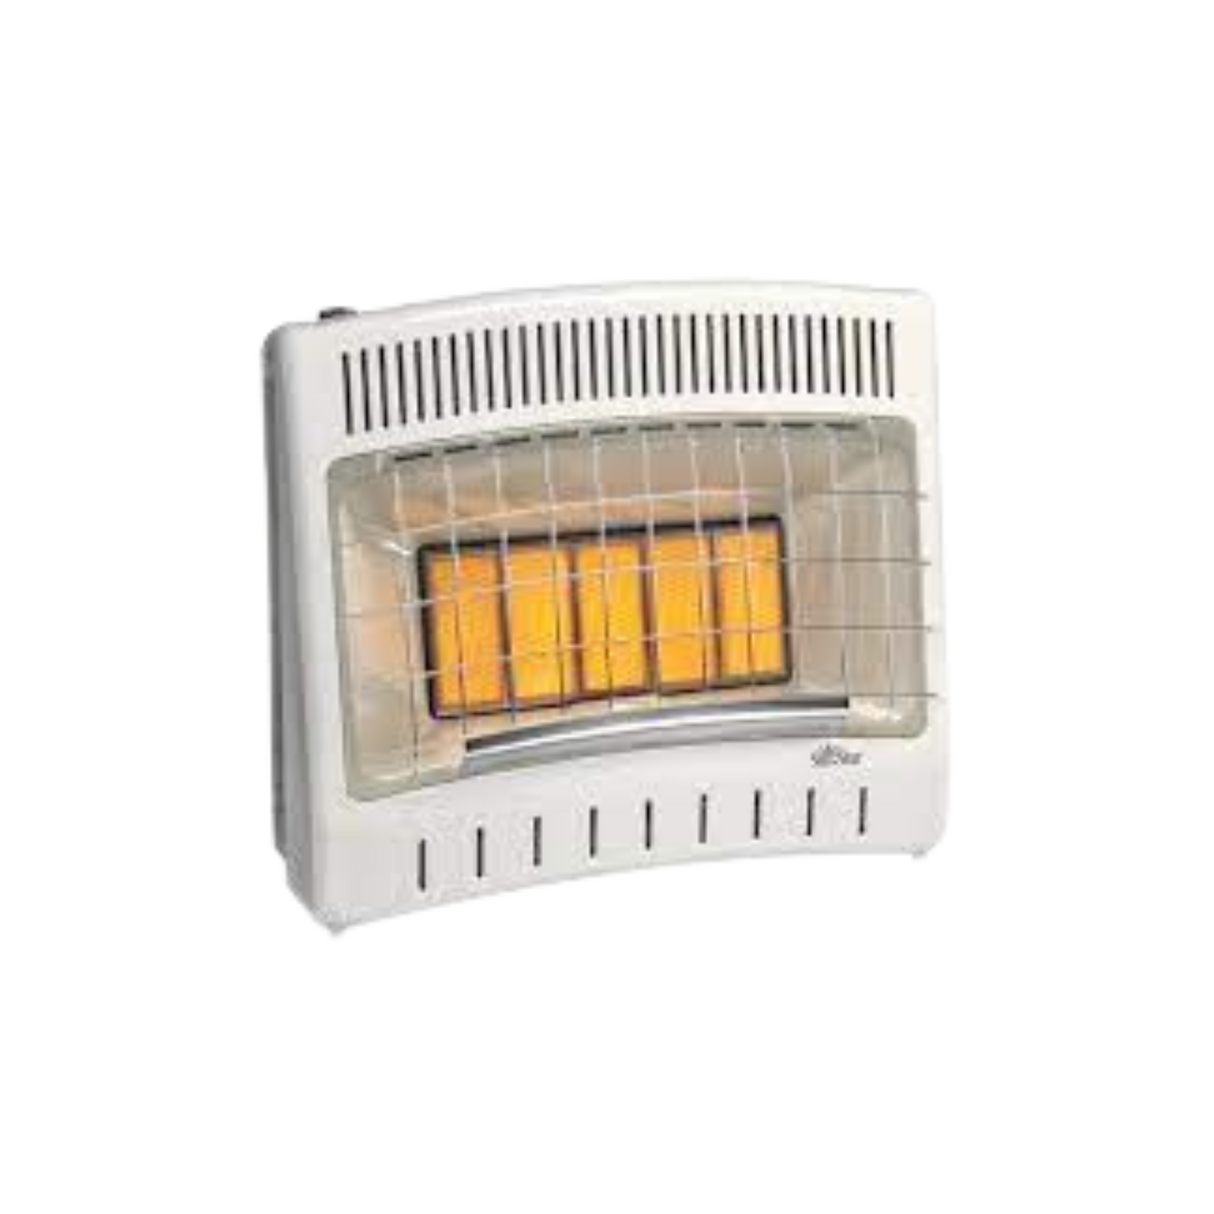 Sunstar Heating Products SC30T-N 27000 BTU Thermostatic Vent Free Infrared/Radiant Heater, Natural Gas